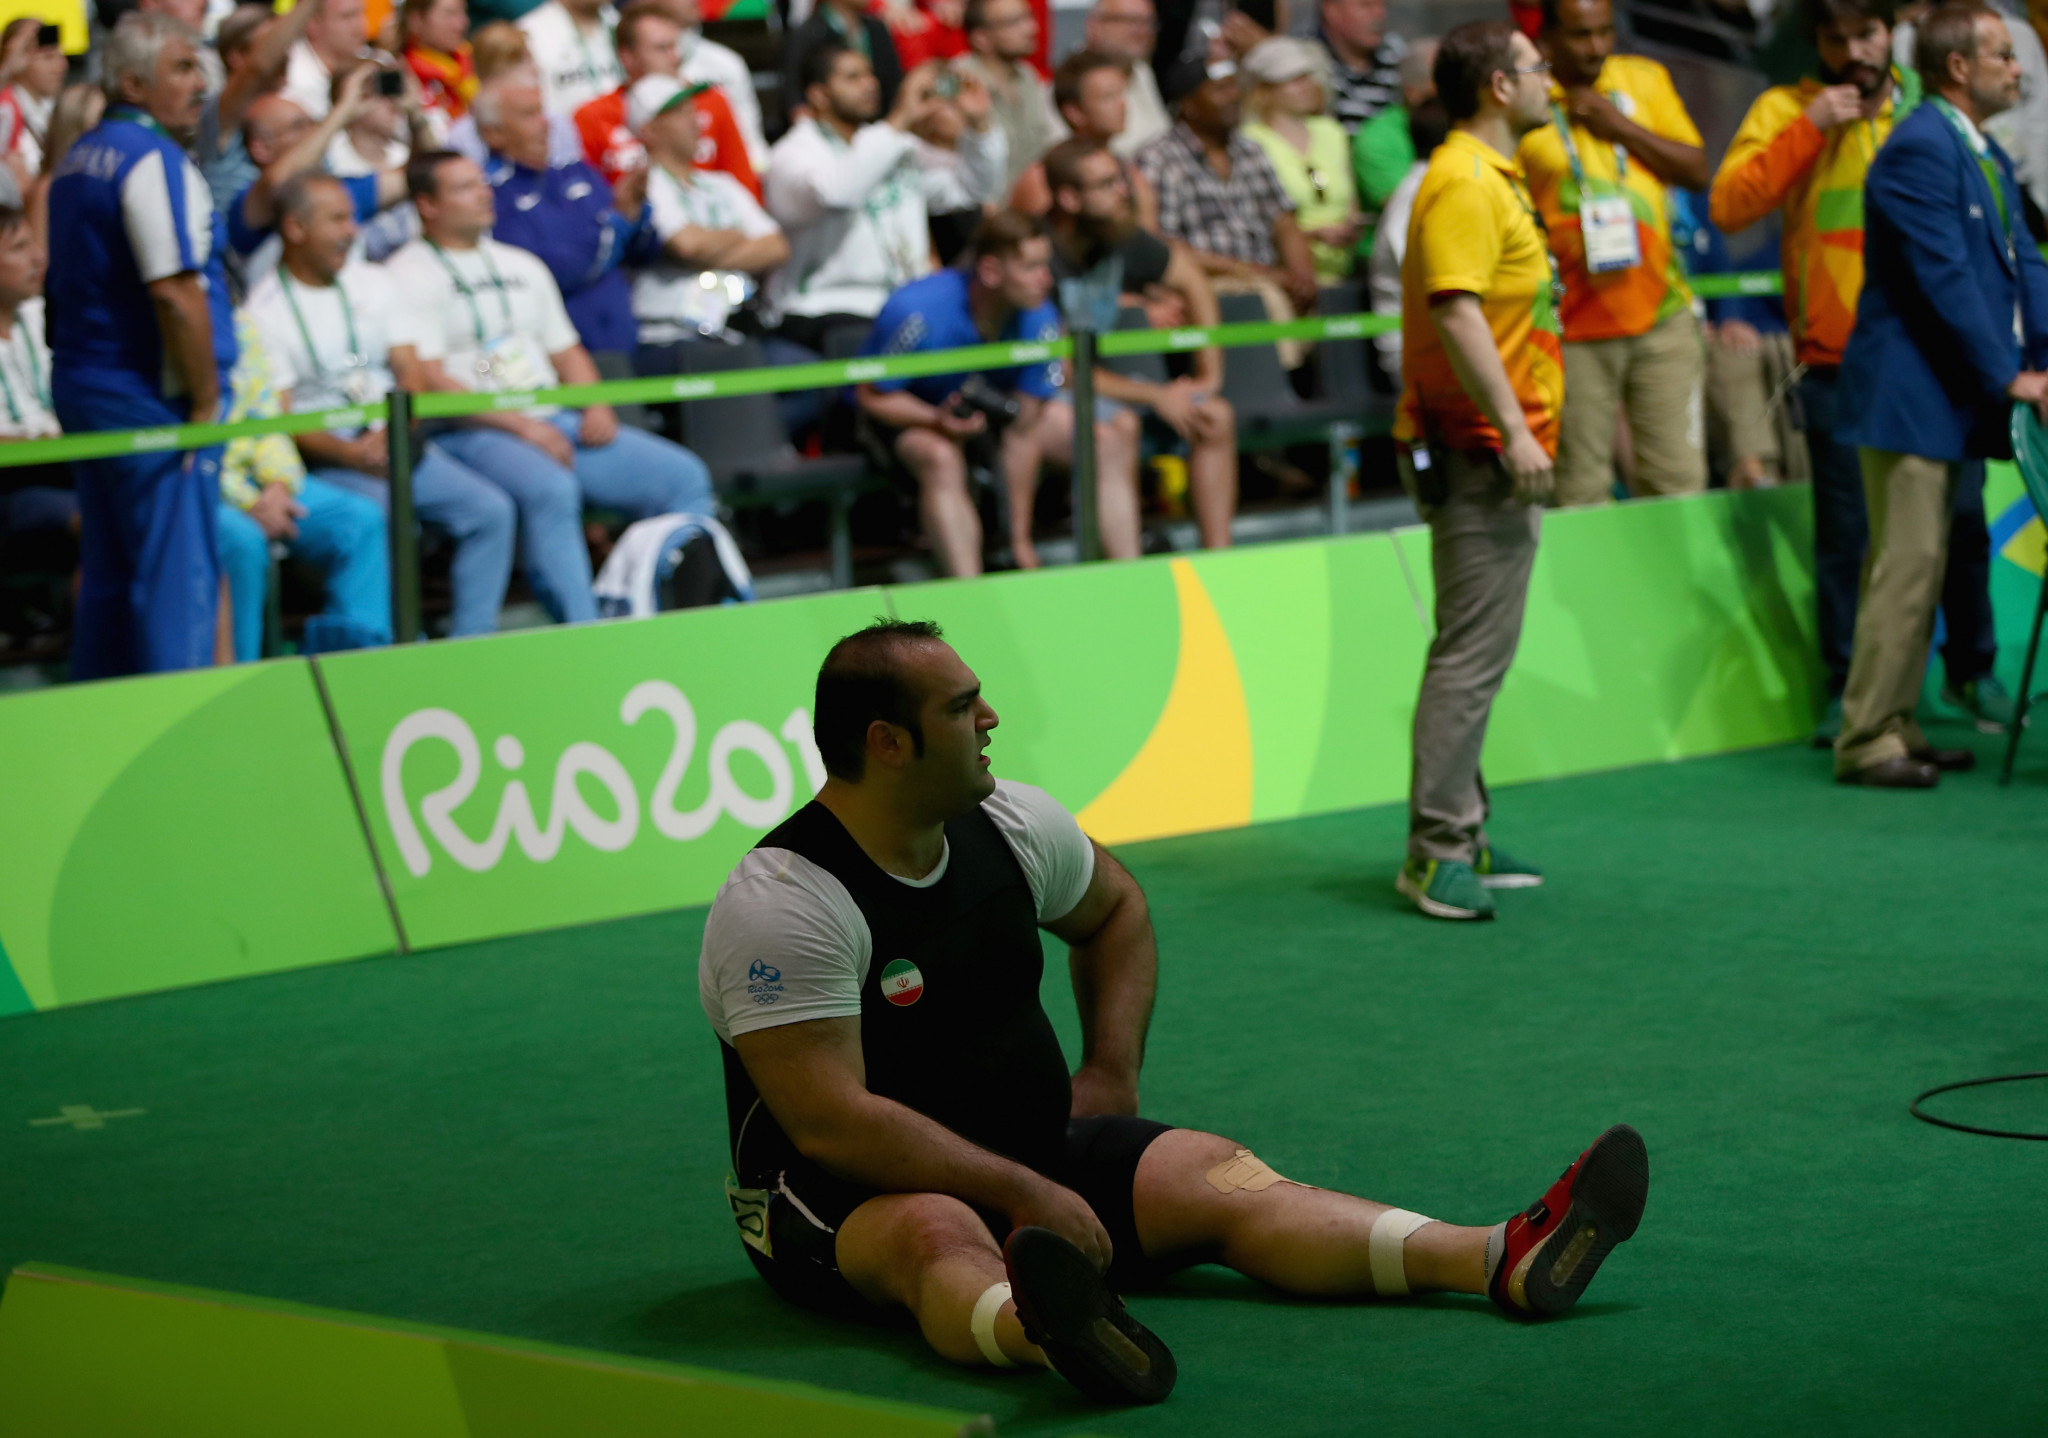 Weightlifting reinvented - no more press-out, new competitions, fewer referees 